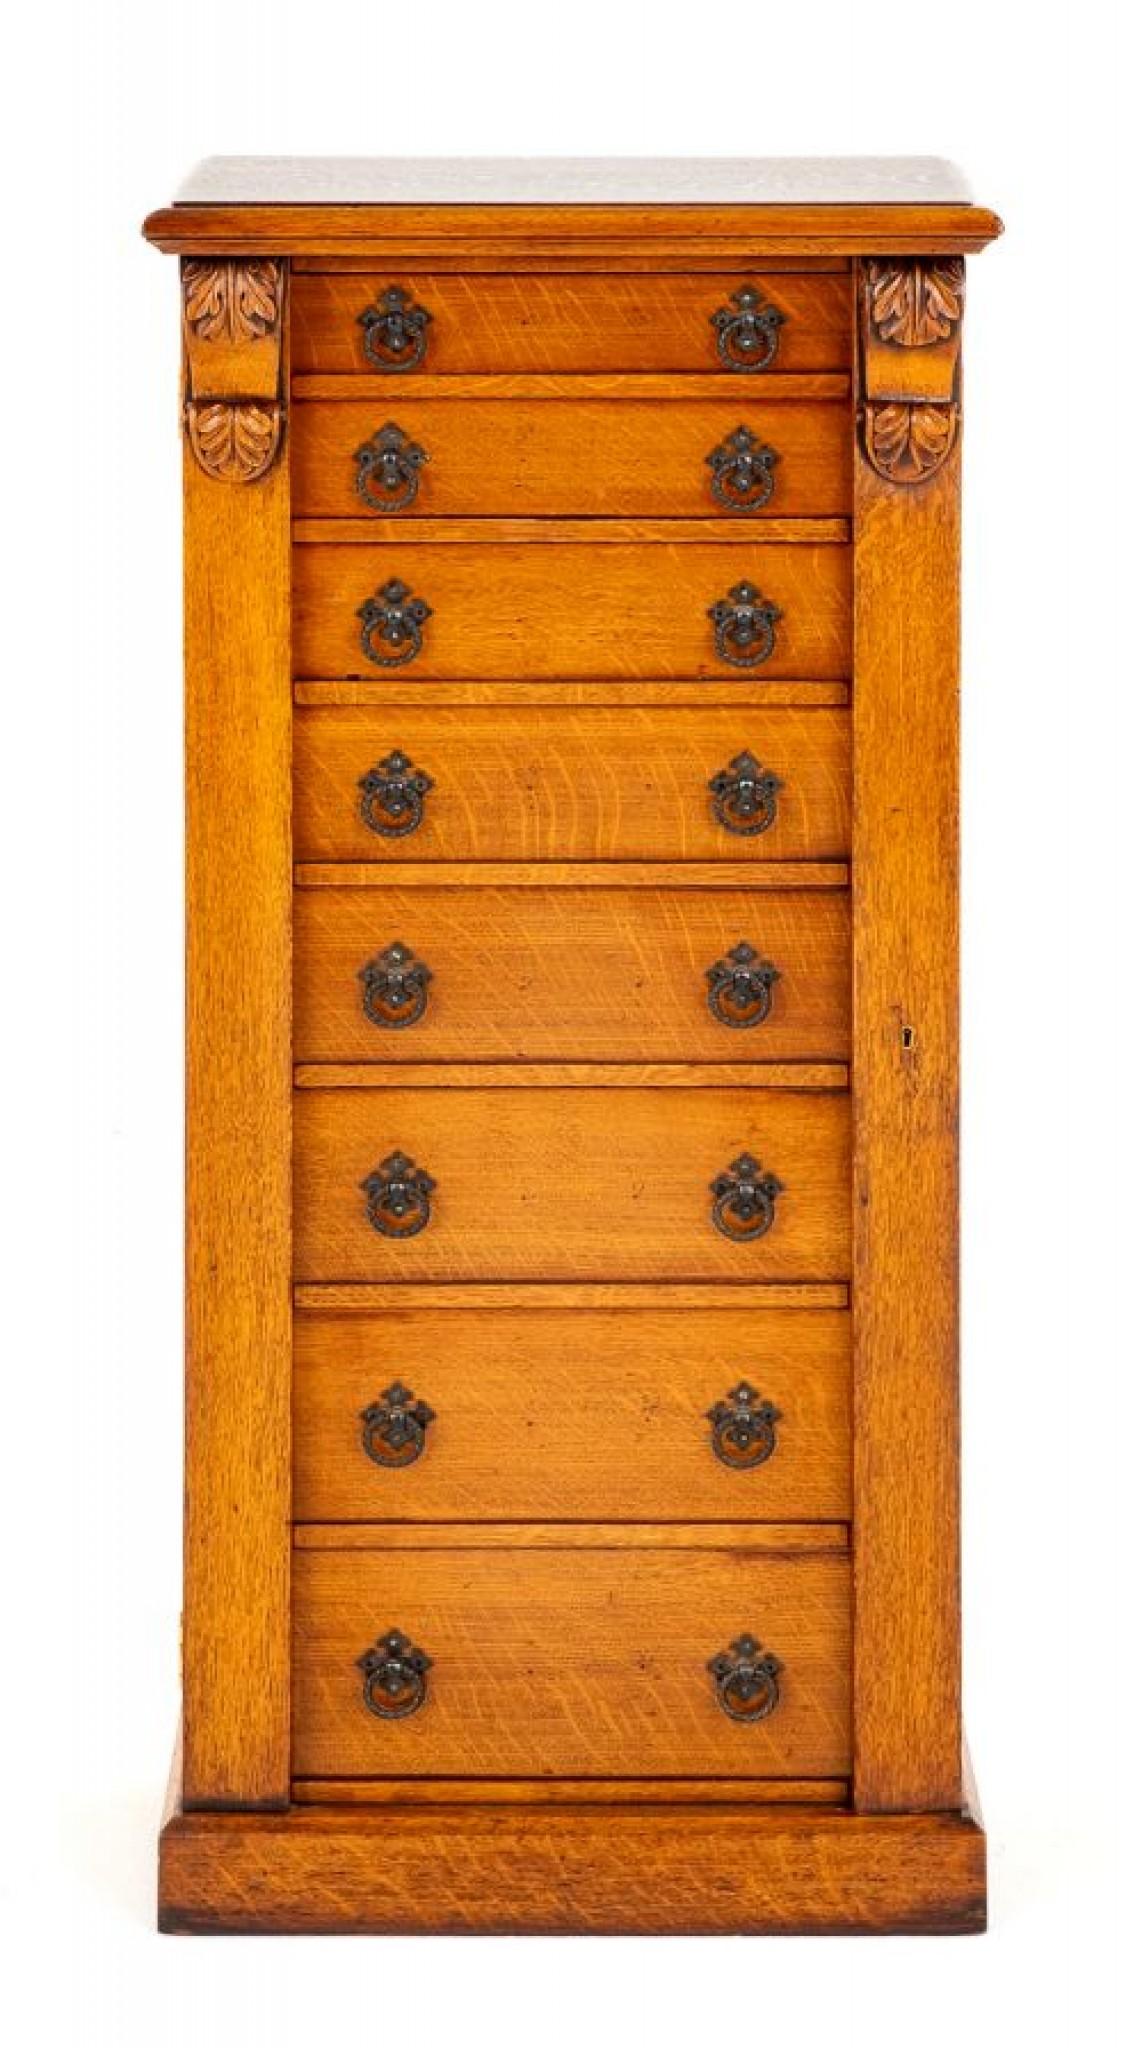 This Wellington Chest is Raised upon a Plinth Base.
Having an Arrangement of 8 Oak Lined Drawers.
Featuring Carved Corbels.
This Chest Has a Typical Wellington Locking System.
Historical Significance: The name 